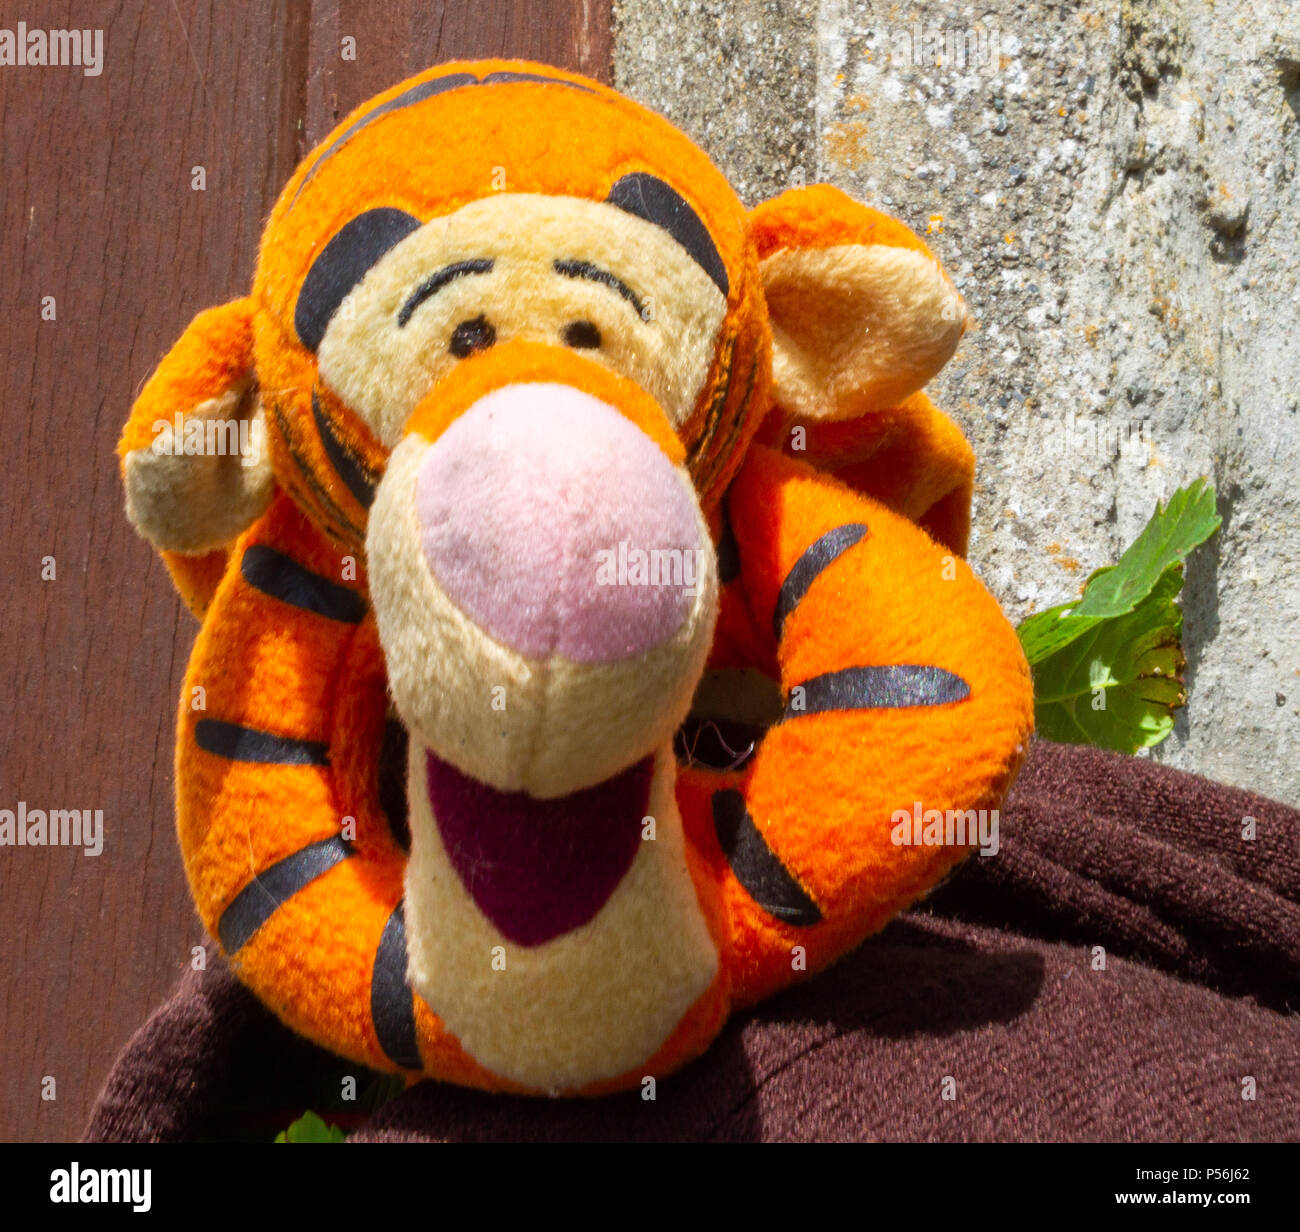 tigger the tiger character from winnie the poo books. Stock Photo